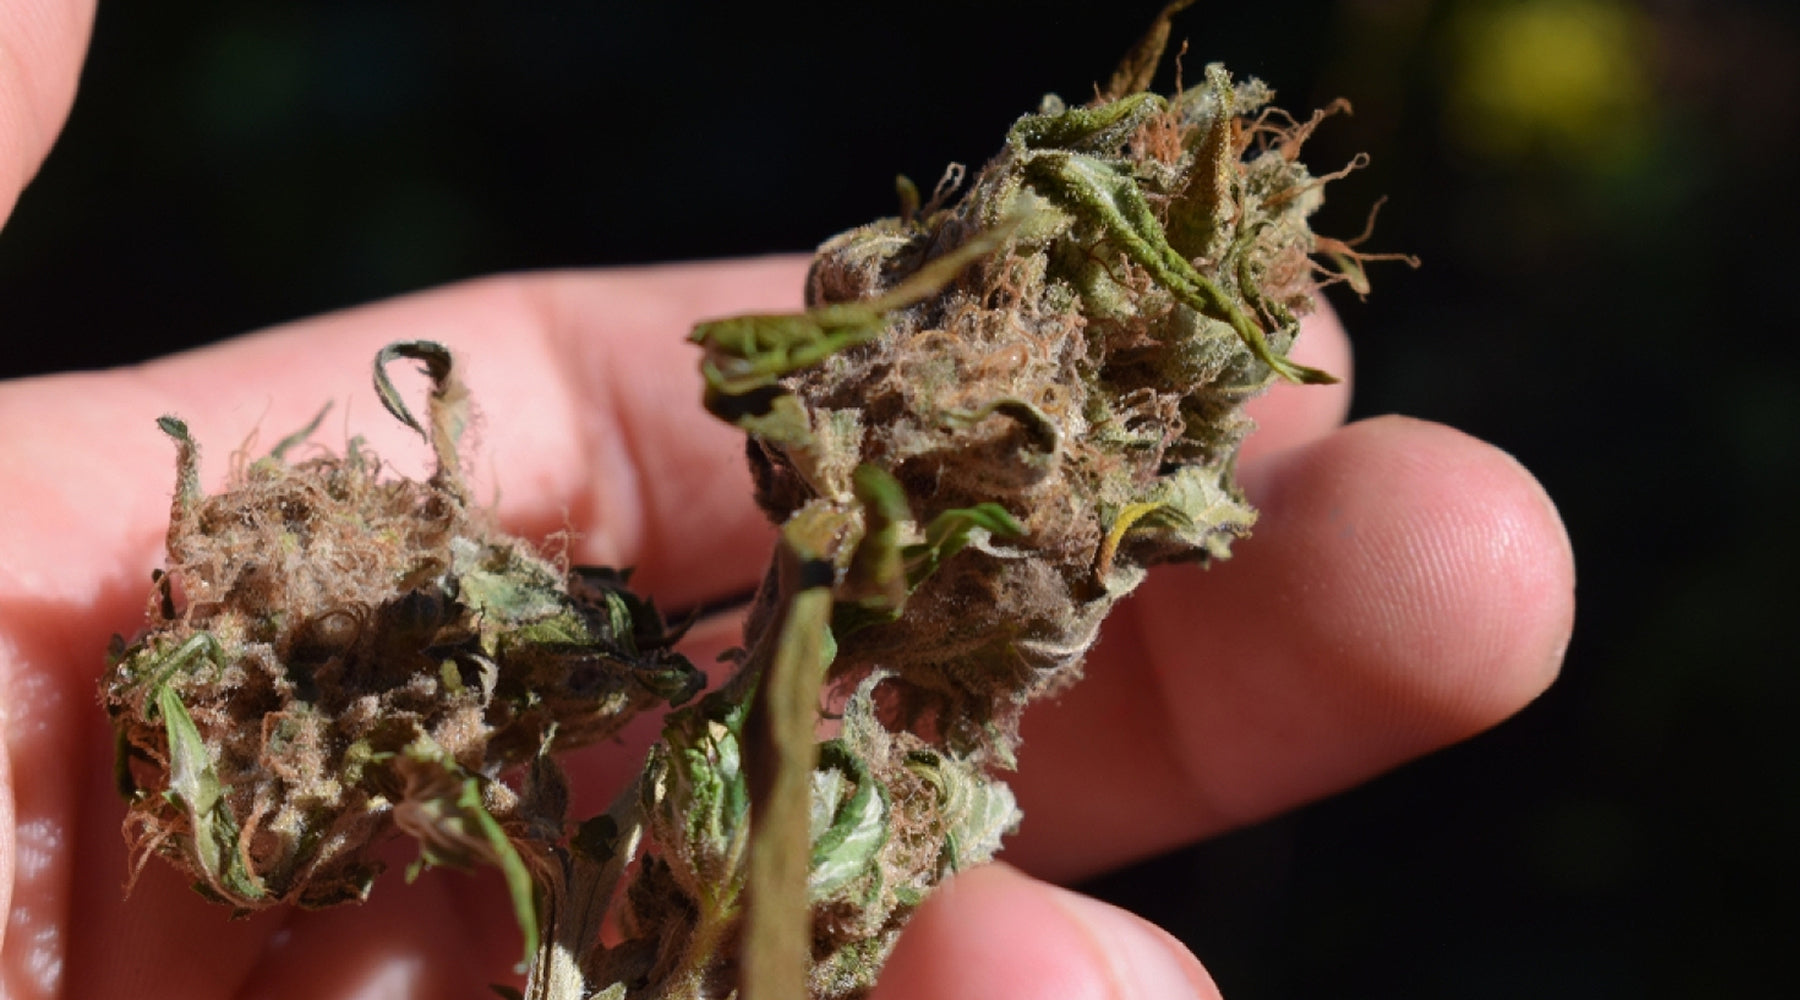 The Best Way to Avoid Getting Moldy Weed